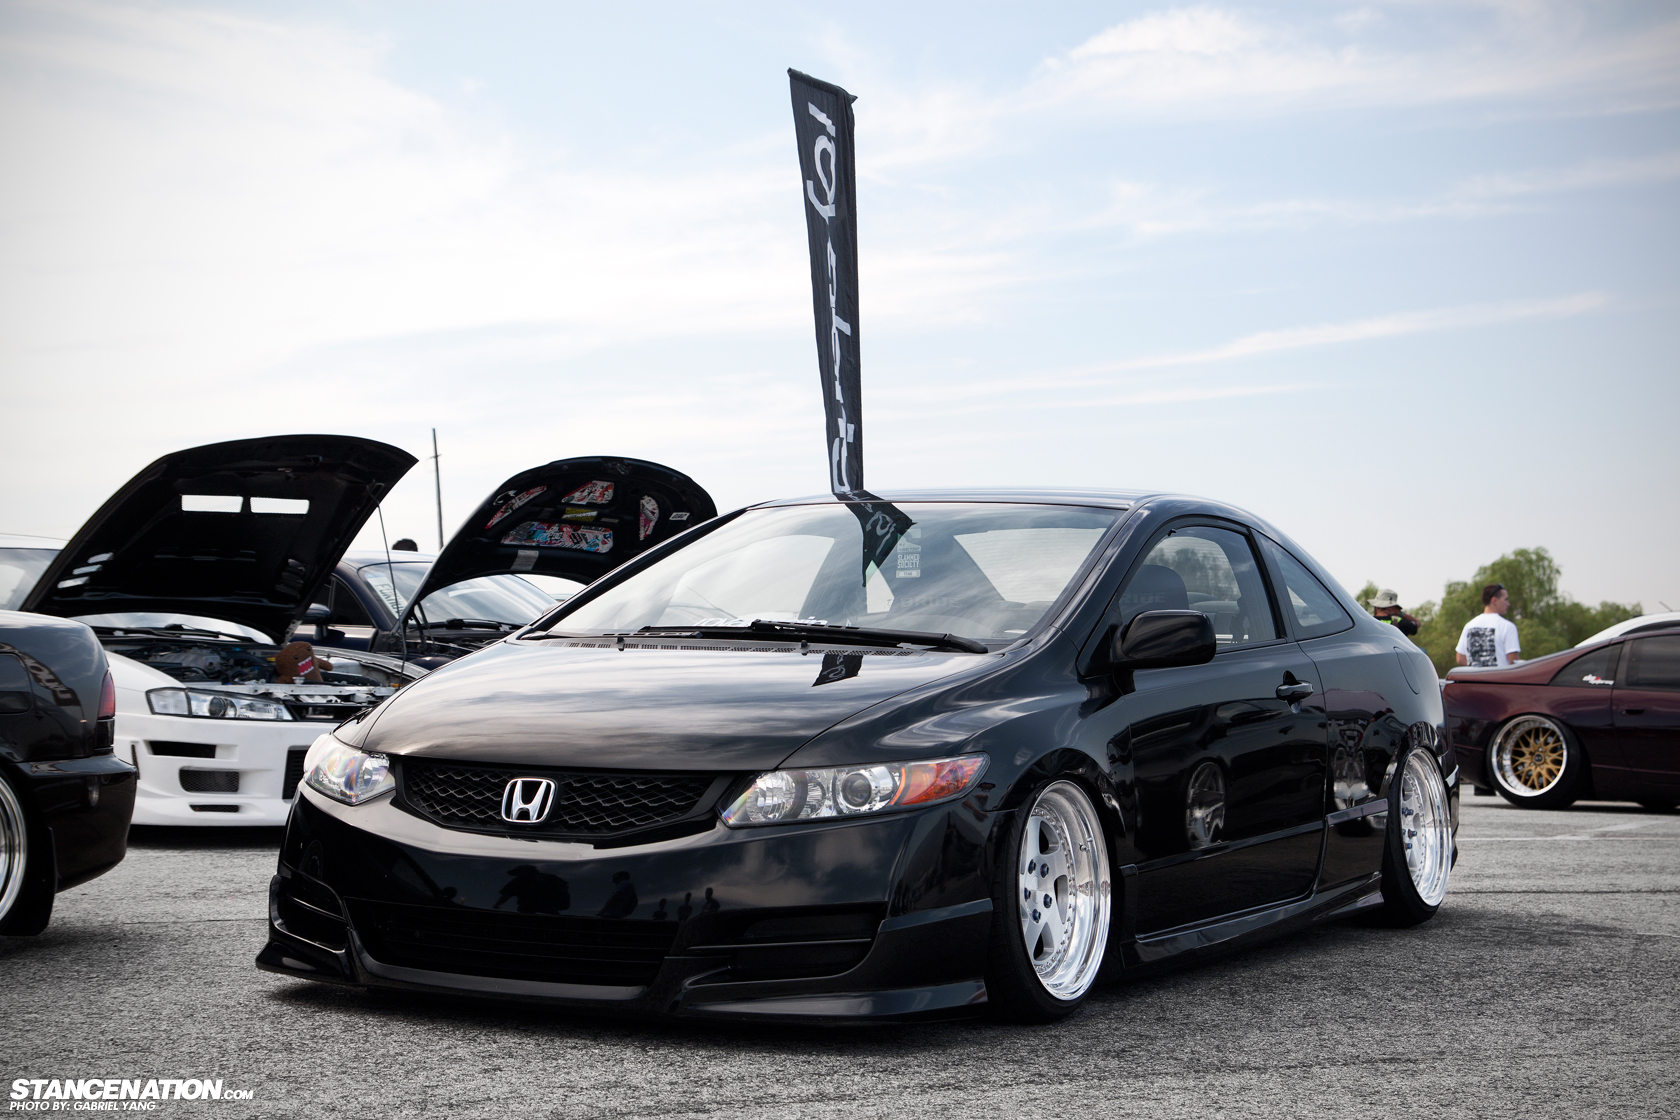 Gallery of 9th Gen Civic.